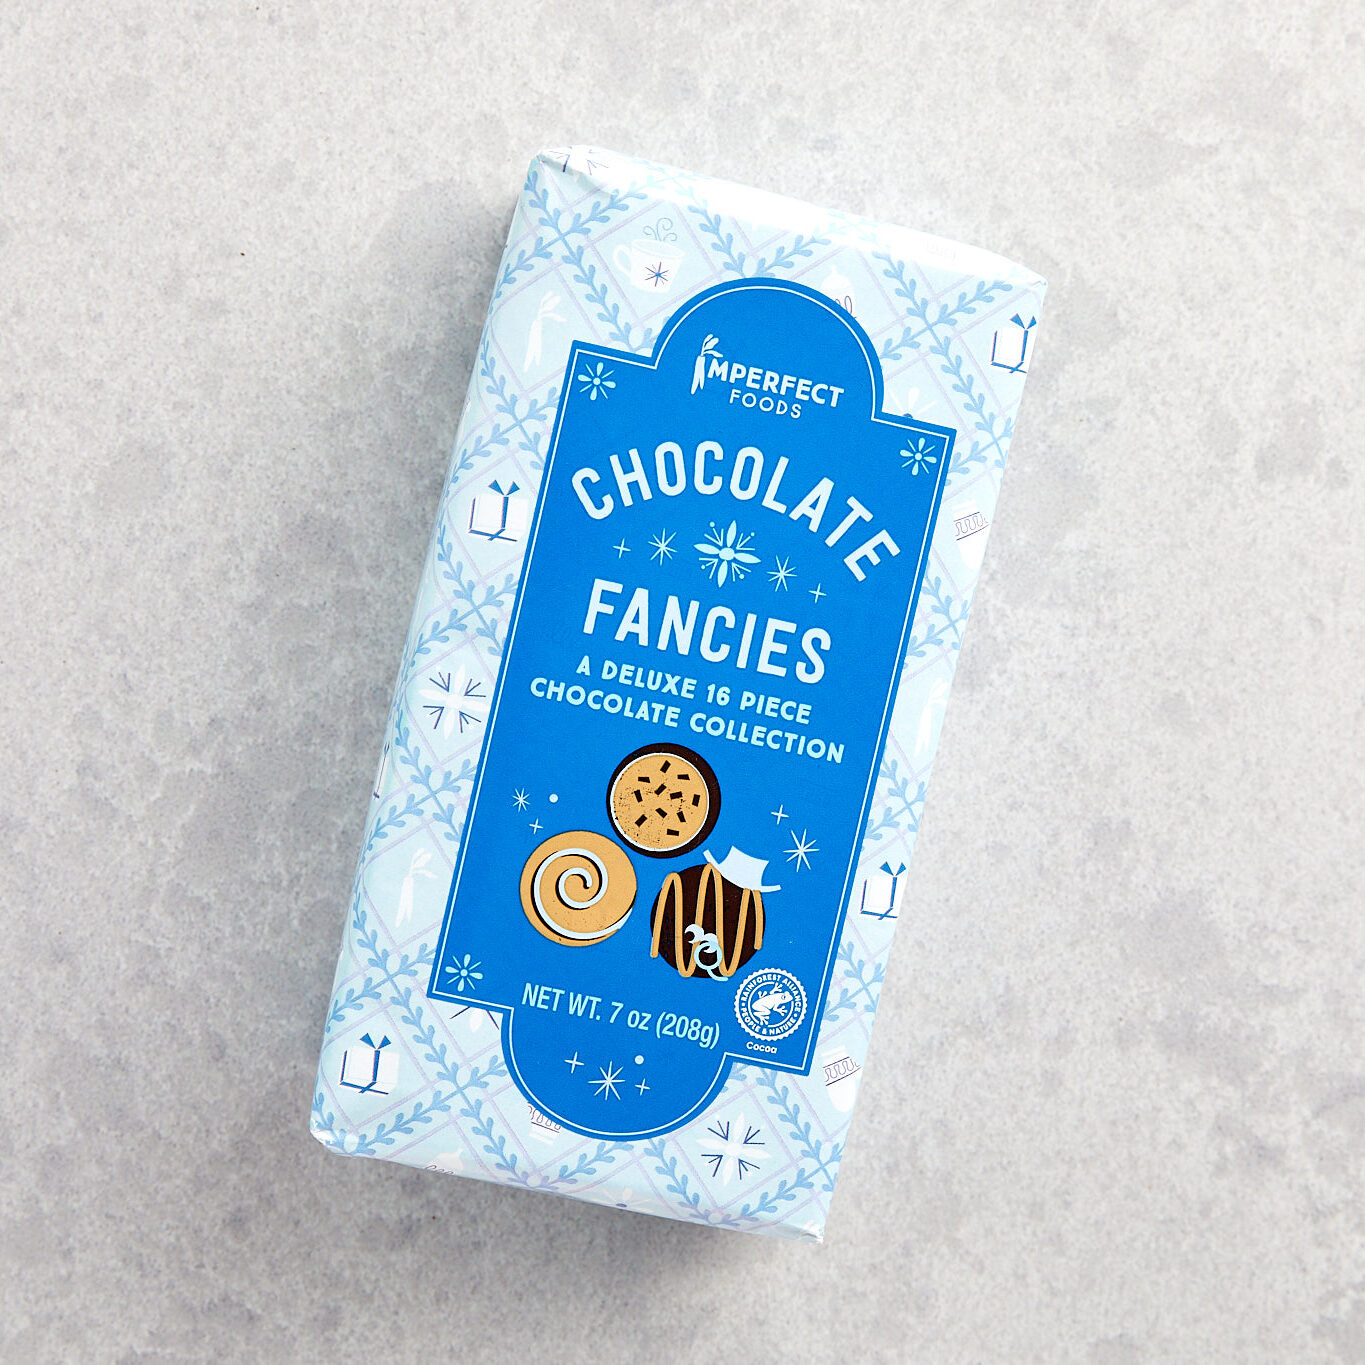 Chocolate Fancies - great gifts under $10